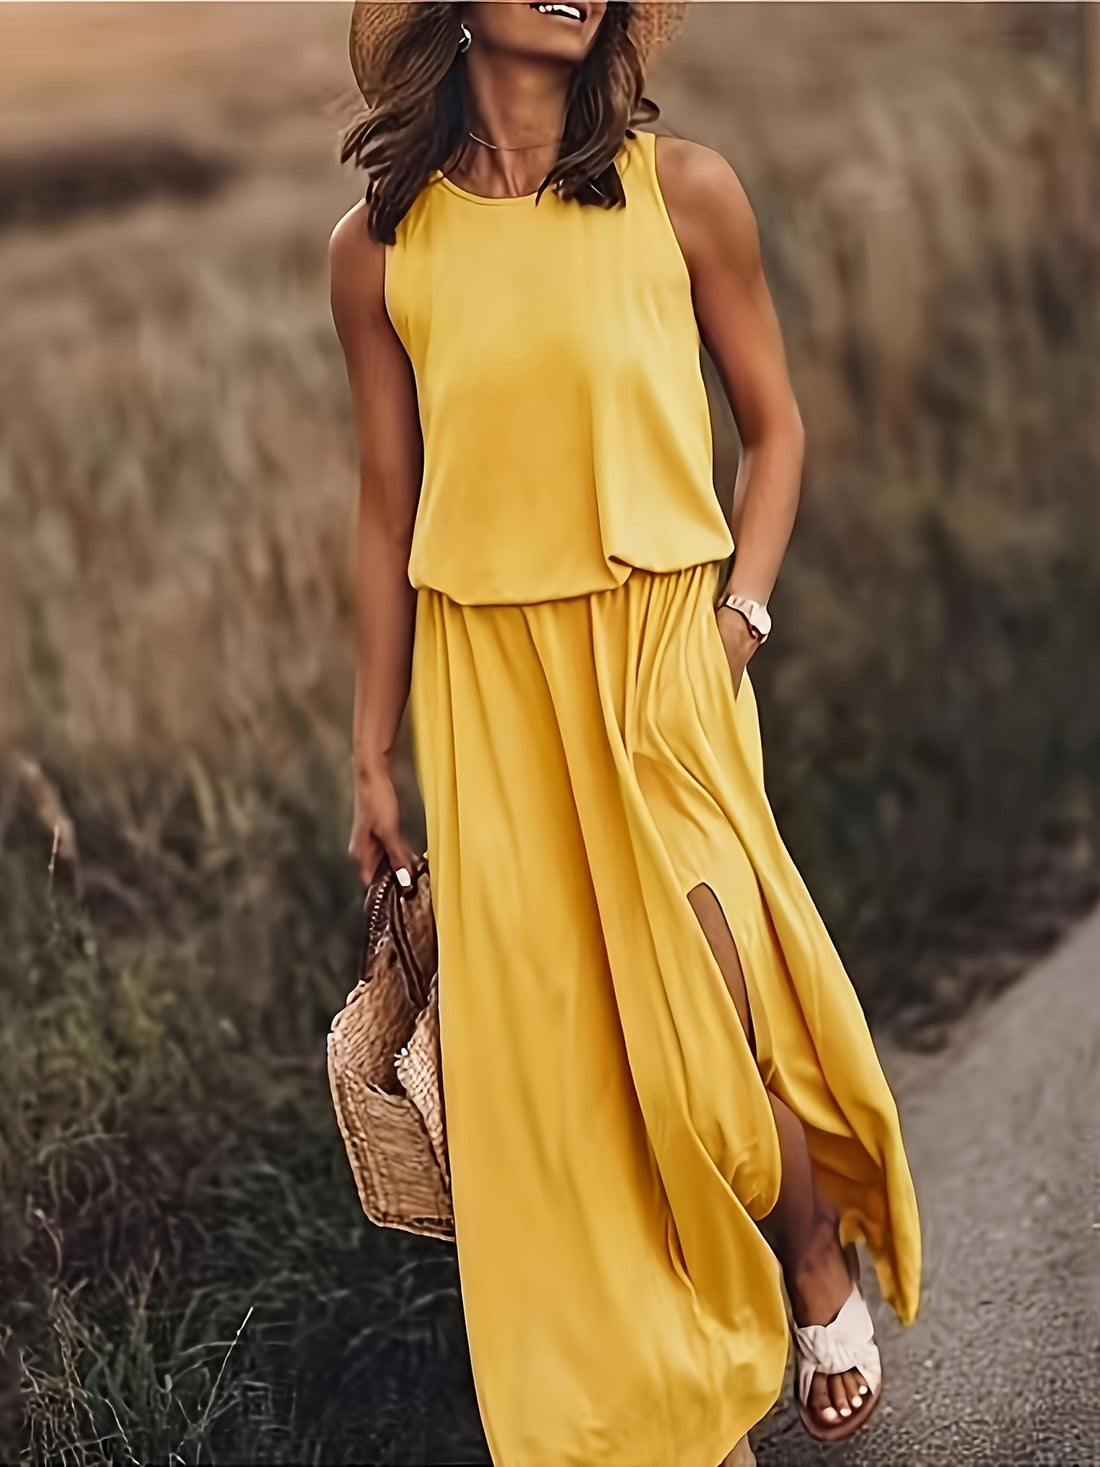 Solid Color Crew Neck Tank Dress, Casual Sleeveless Split Dress For Spring & Summer, Women's Clothing - Fashionqueene.com